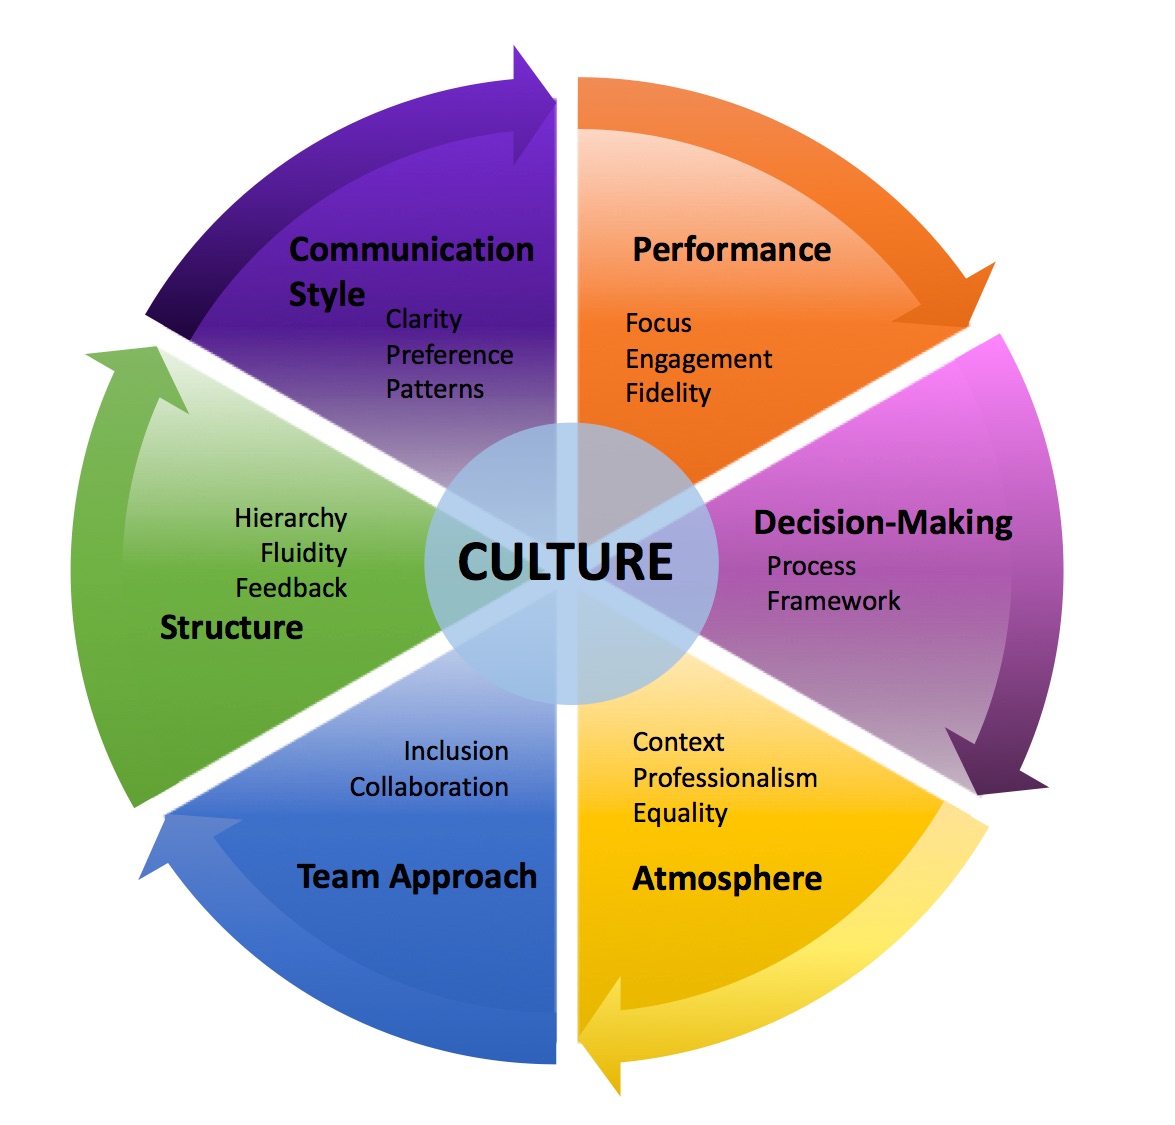 Business coaching can help in assessing organizational culture